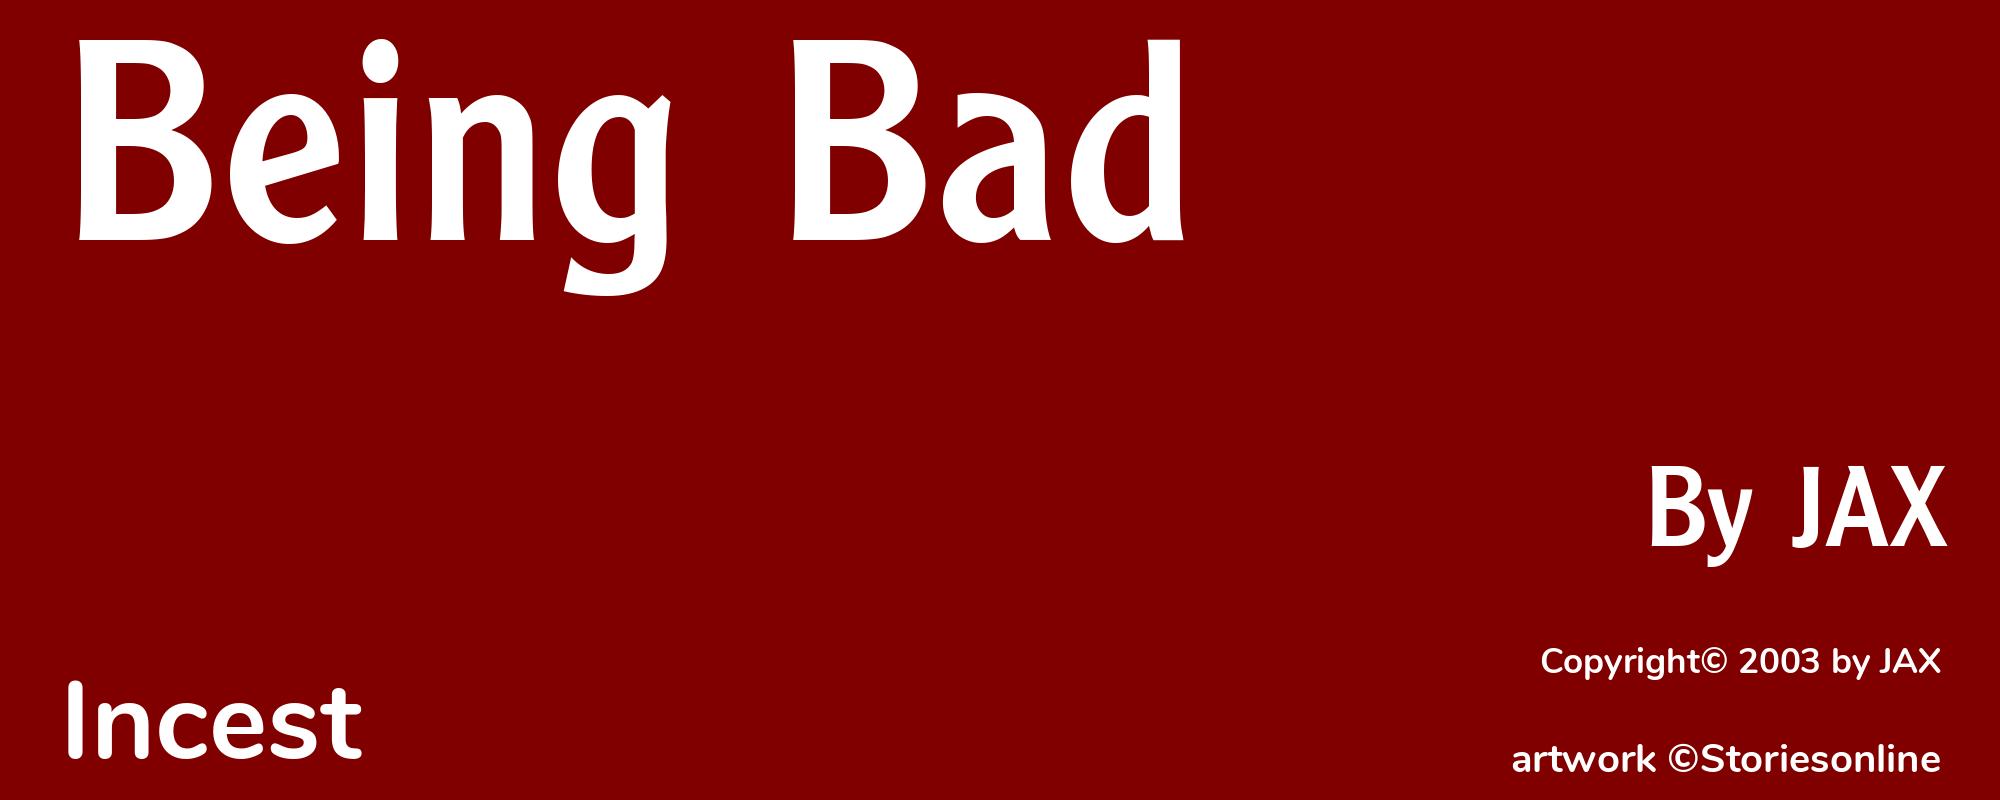 Being Bad - Cover